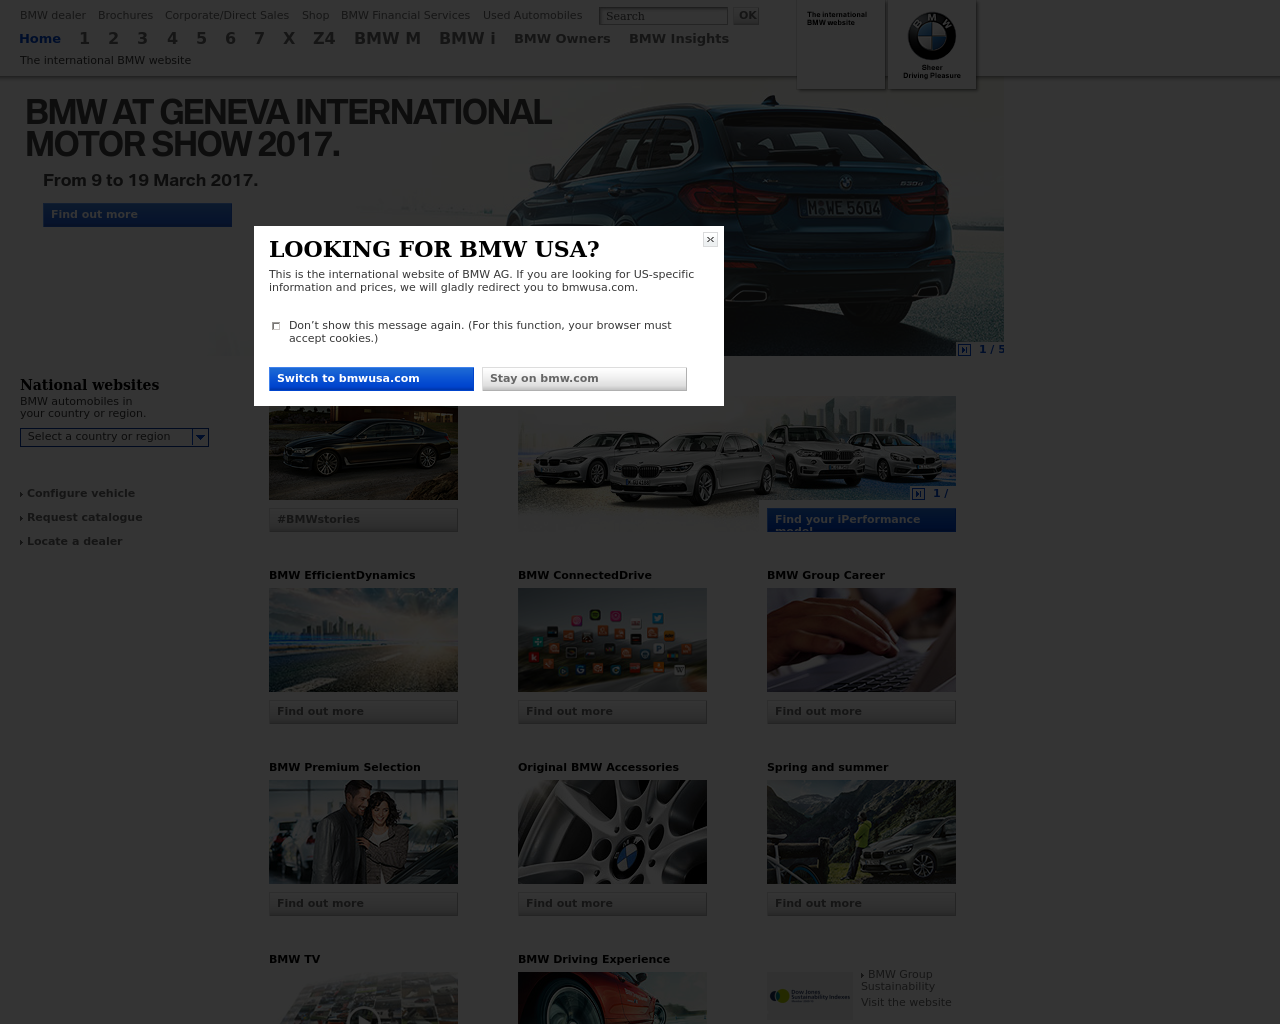 Image site bmw.net in 1280x1024